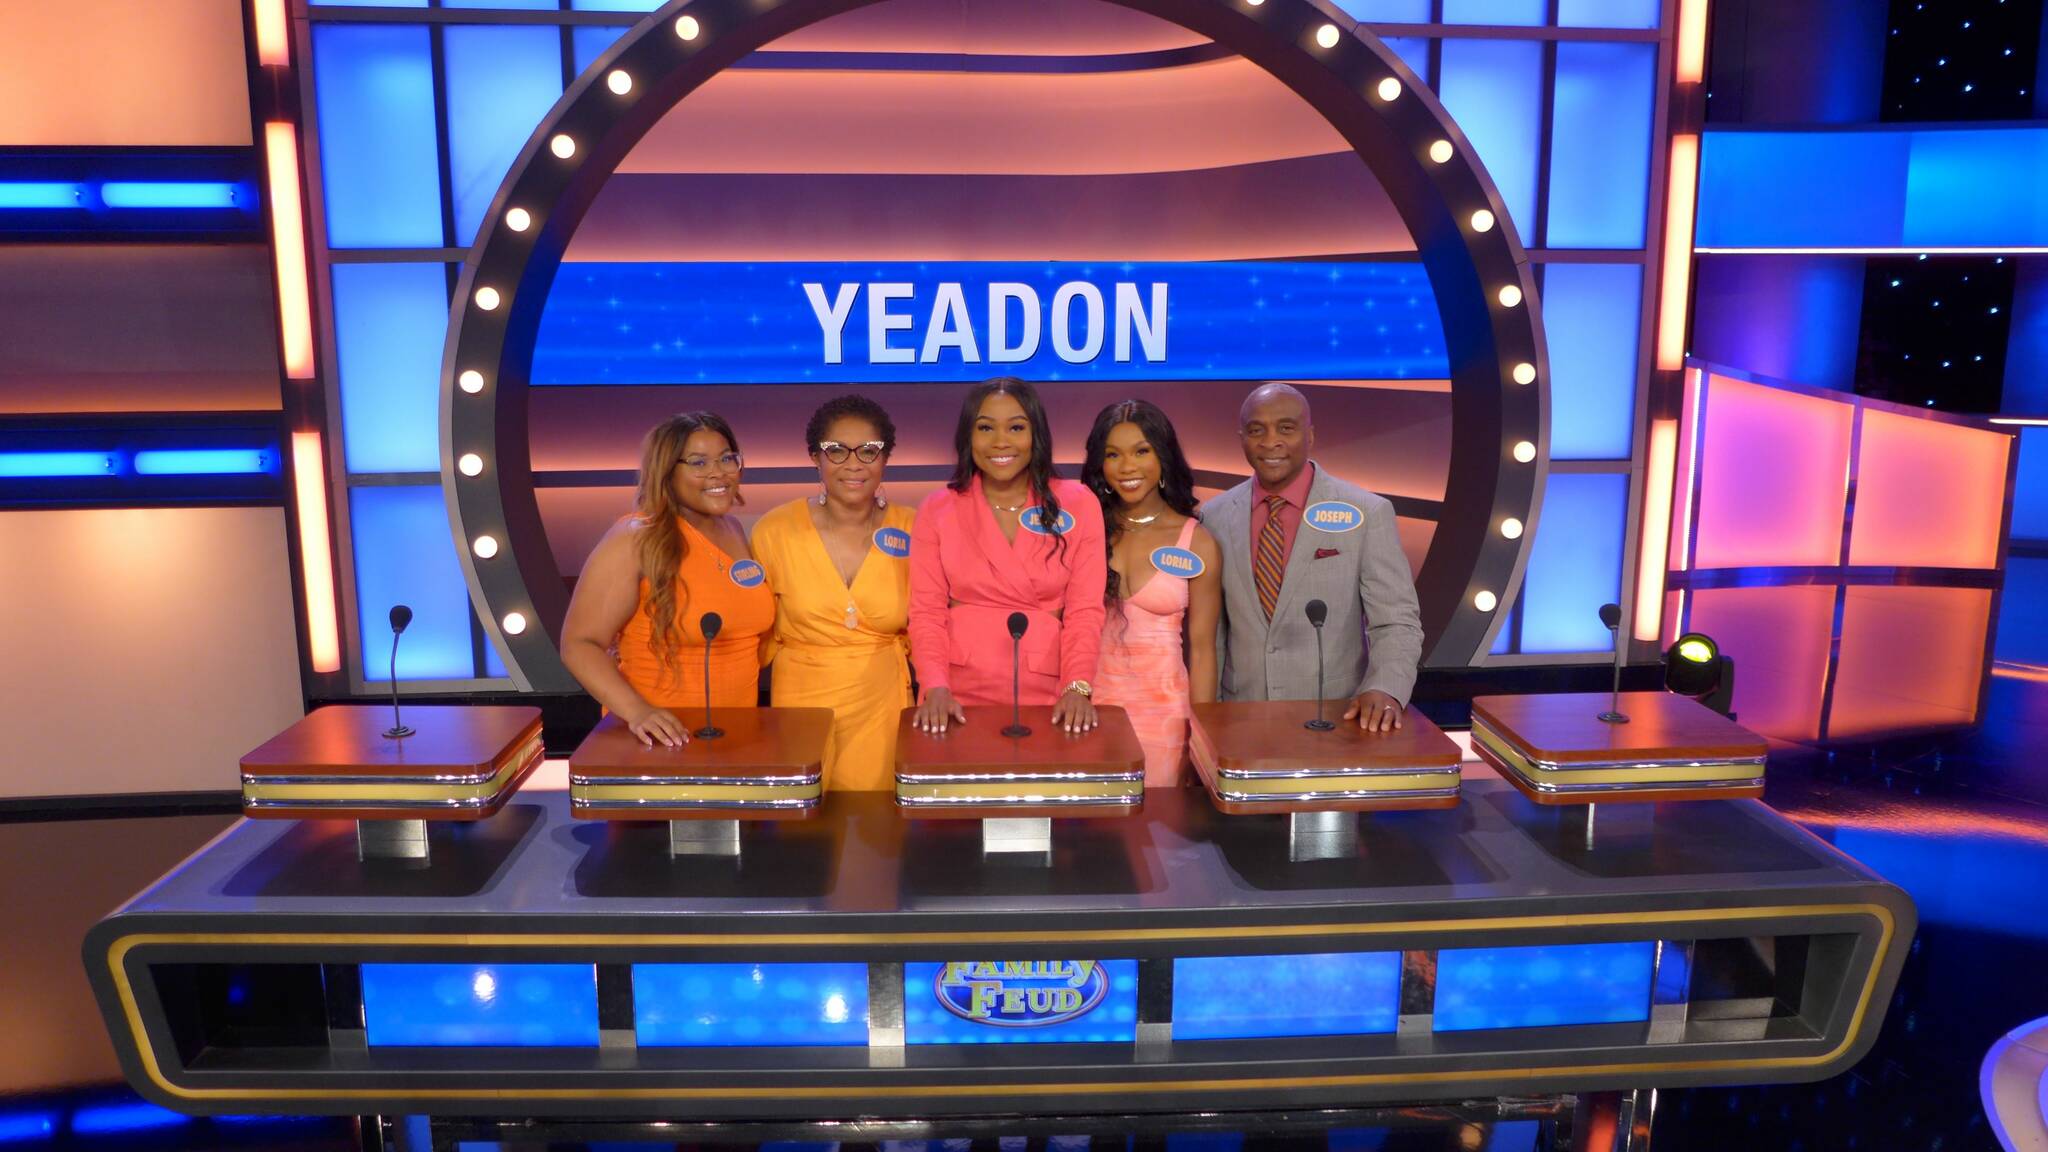 Mercer Island’s Yeadon family, from left to right, Stirling, Loria, Jemma, Lorial and Joseph on the Family Feud set. Photo courtesy of Family Feud